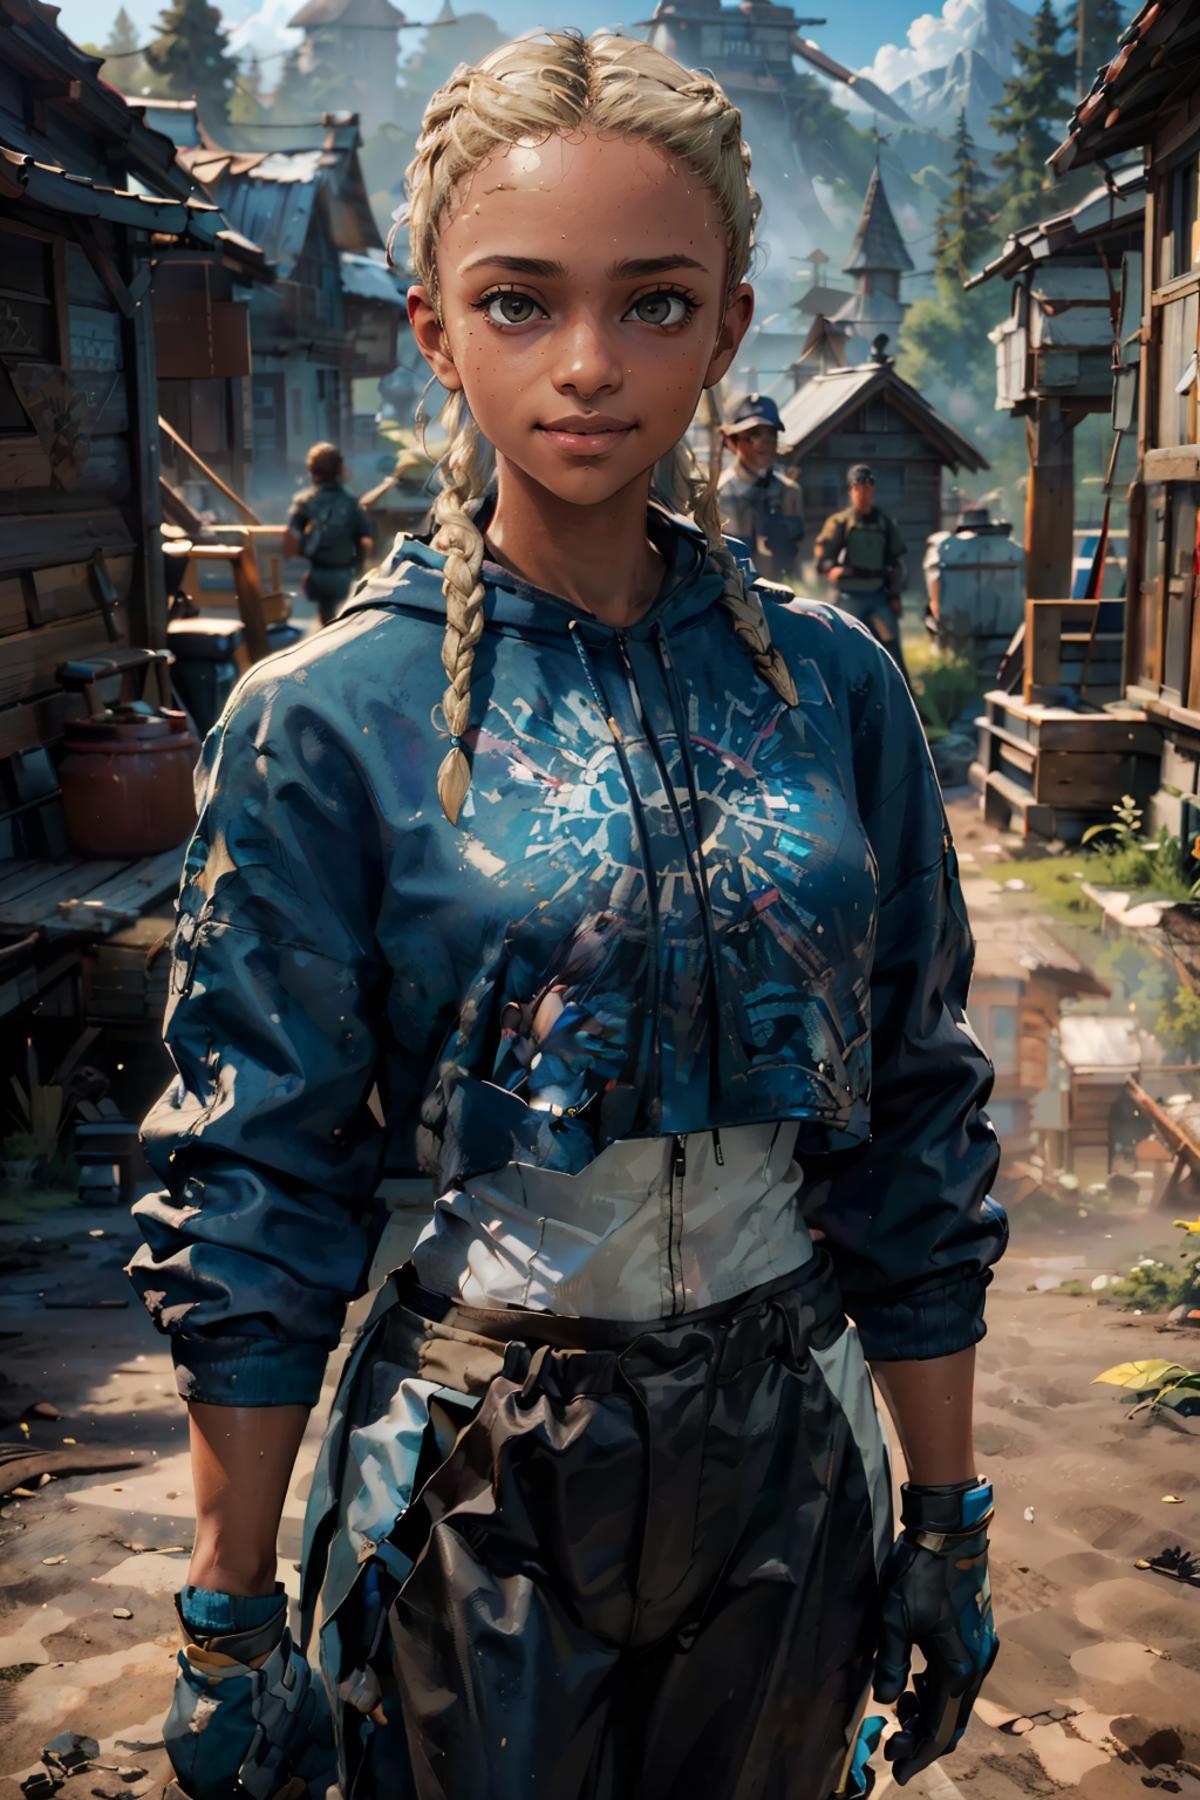 Mickey from Far Cry New Dawn image by wikkitikki